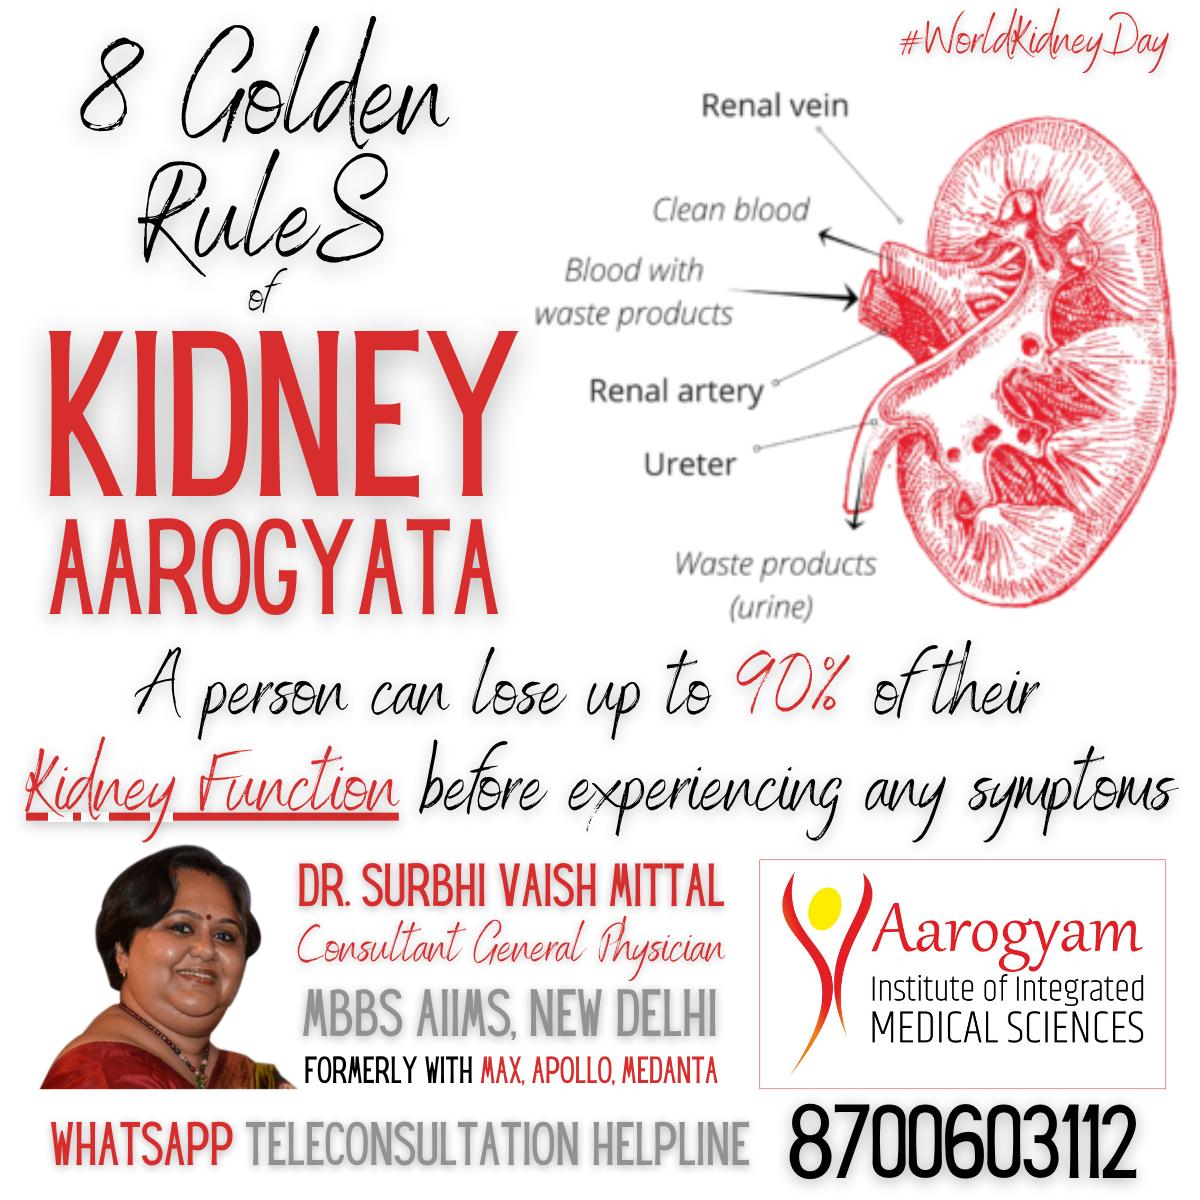 A person can lose up to 90% of their Kidney Function before experiencing any symptoms